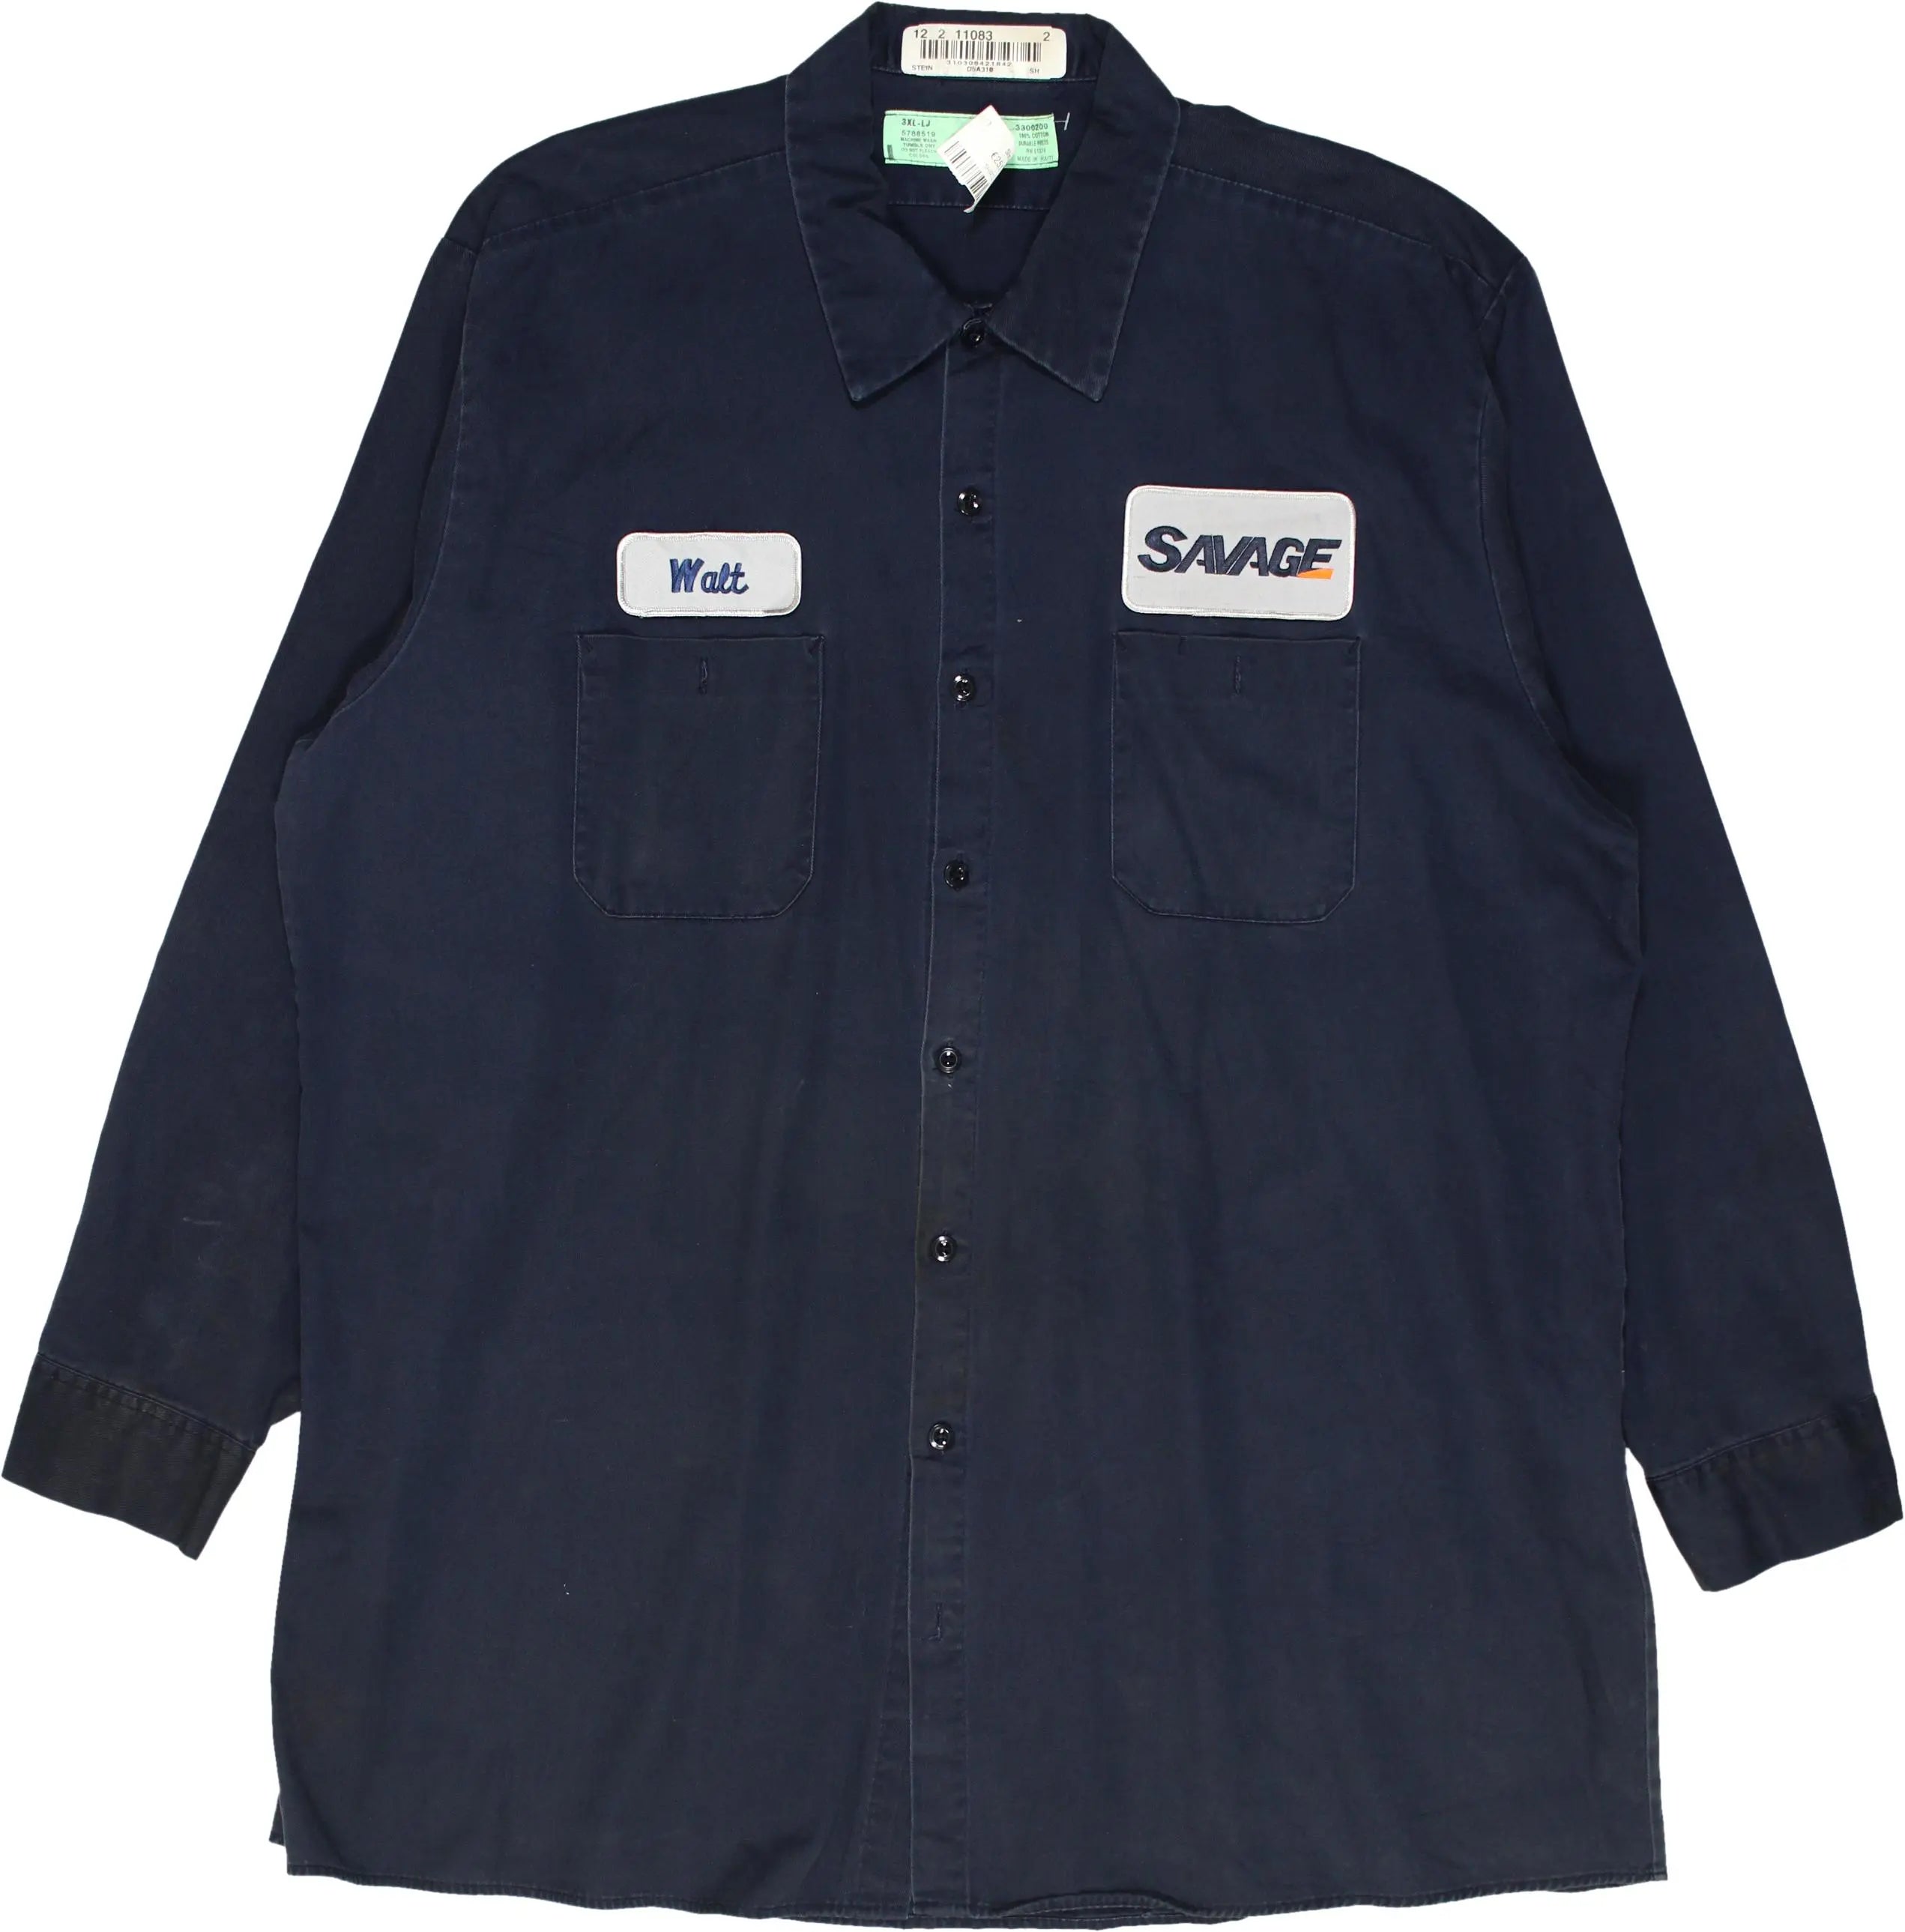 Cintas - Workwear Shirt- ThriftTale.com - Vintage and second handclothing